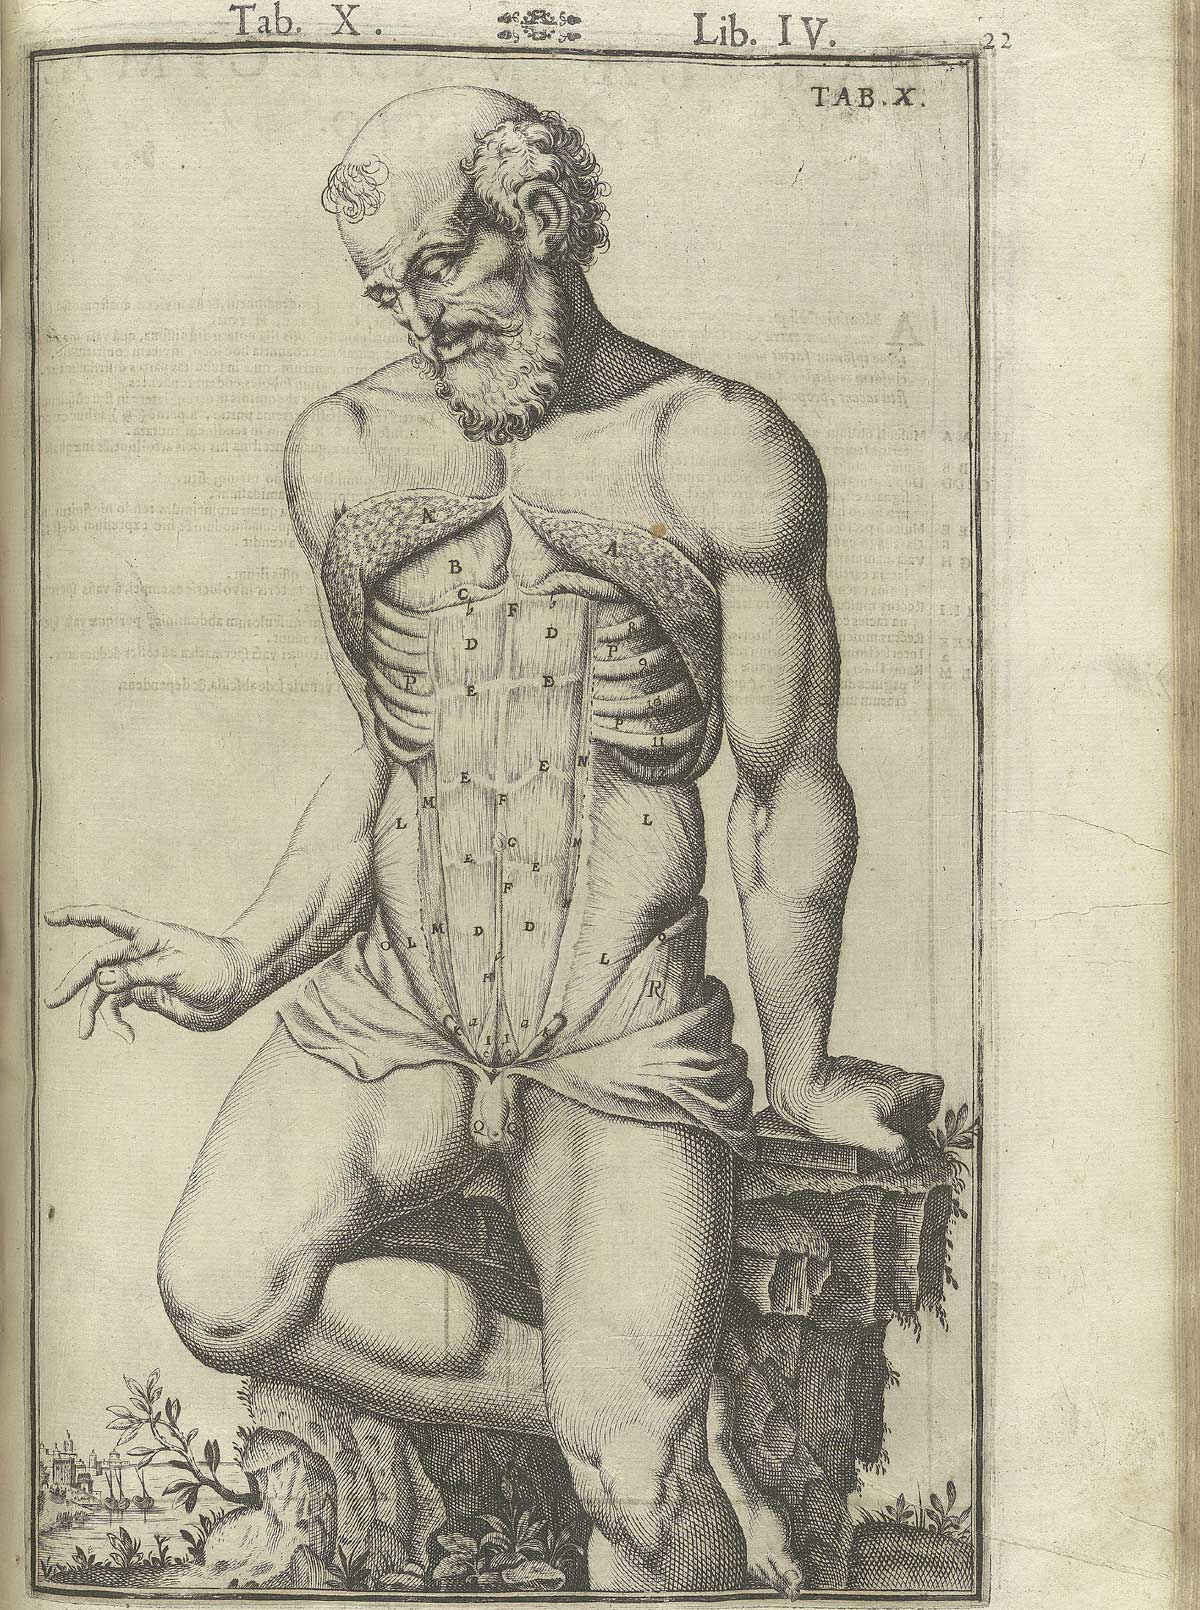 Engraving showing a nude bearded male anatomical figure in a pastoral setting seated on a tree stump facing forward and to the left with flayed abdomen revealing musculature beneath; from Adriaan van de Spiegel and Giulio Cassieri’s De humani corporis fabrica libri decem, Venice, 1627, NLM call no. WZ 250 S755dh 1627.